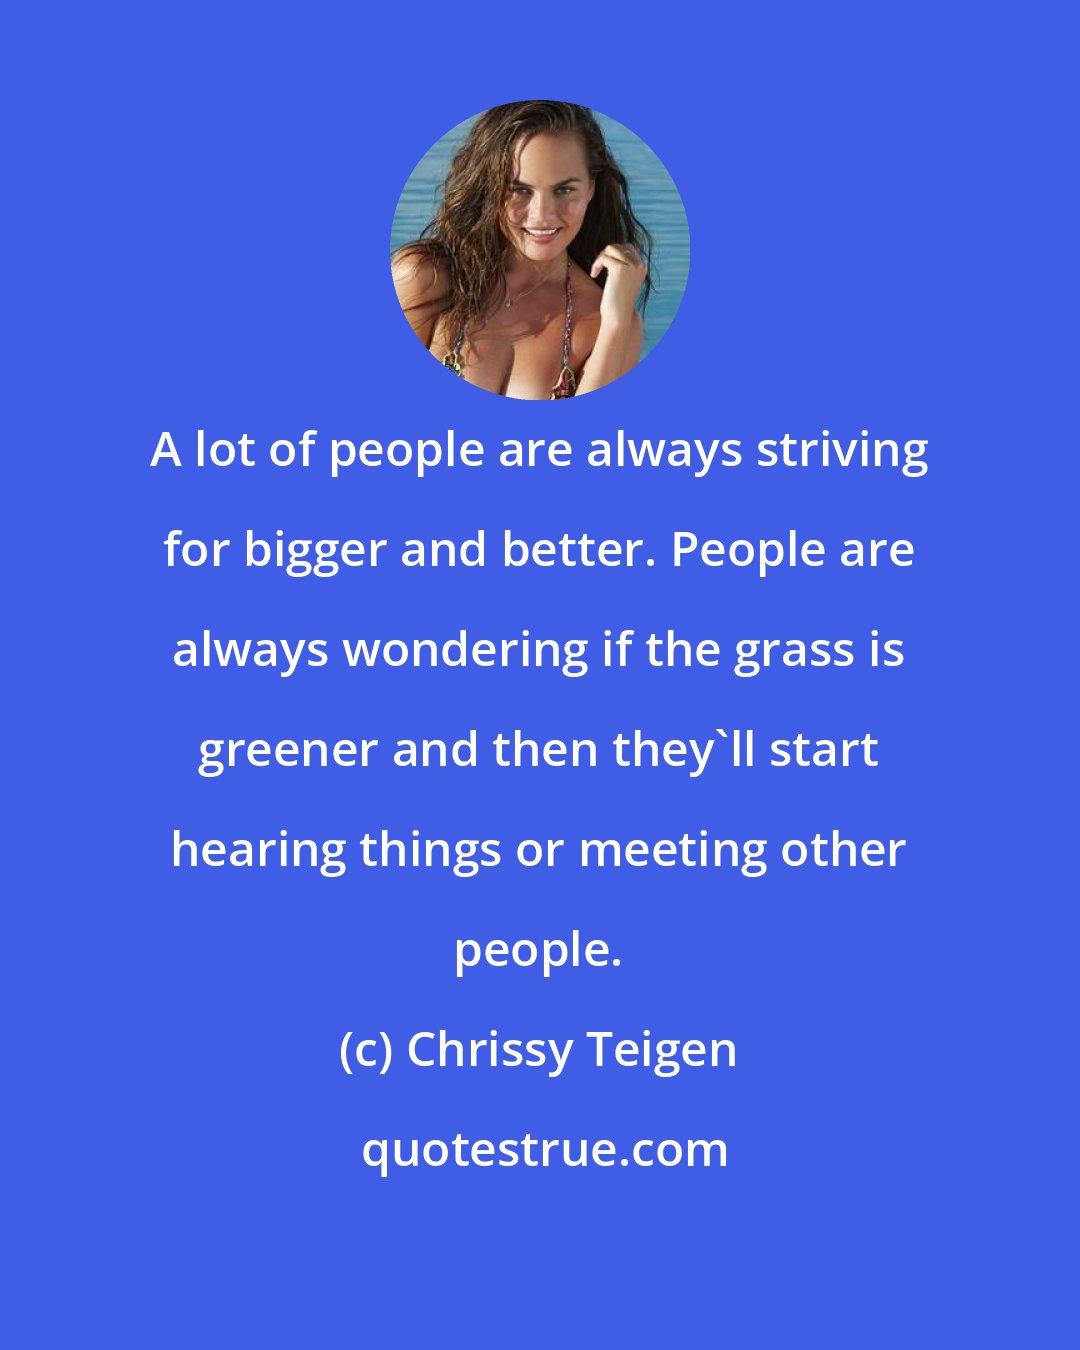 Chrissy Teigen: A lot of people are always striving for bigger and better. People are always wondering if the grass is greener and then they'll​ start hearing things or meeting other people.